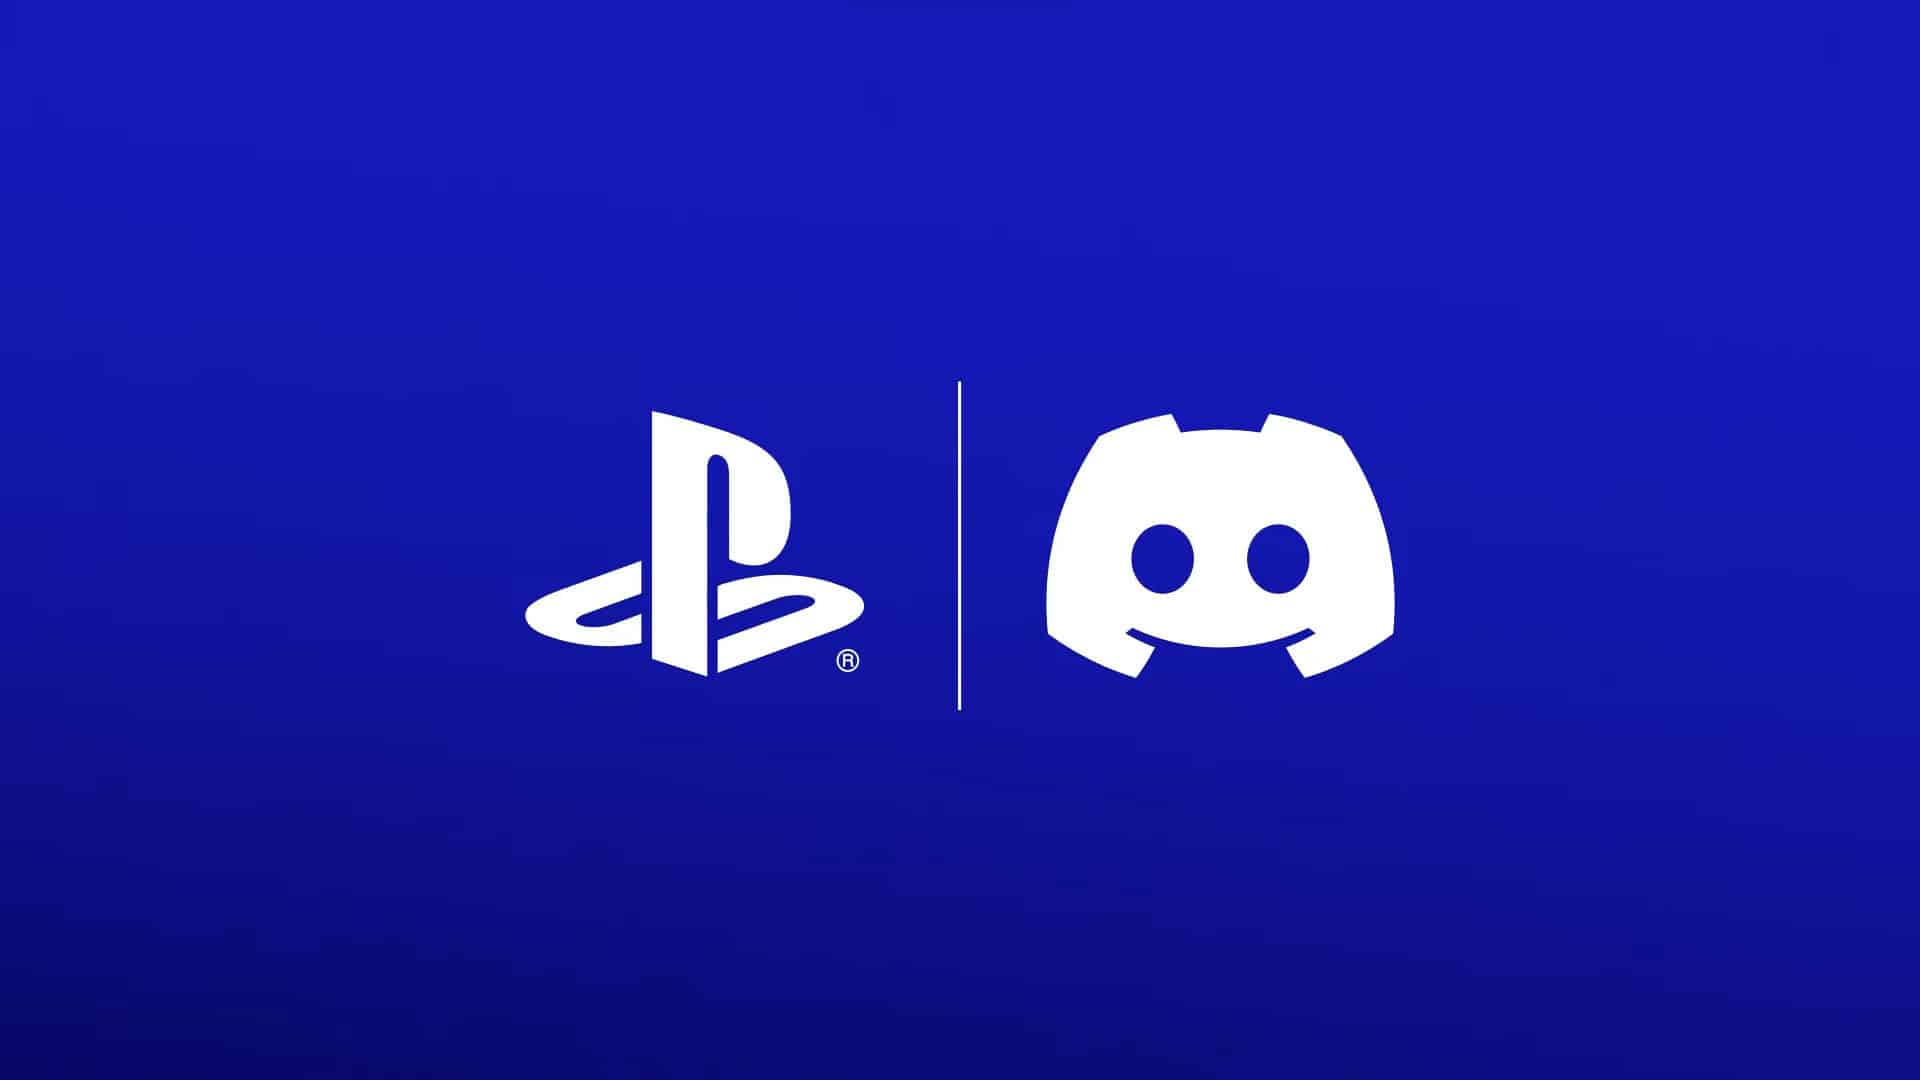 PlayStation 5 Discord patch notes